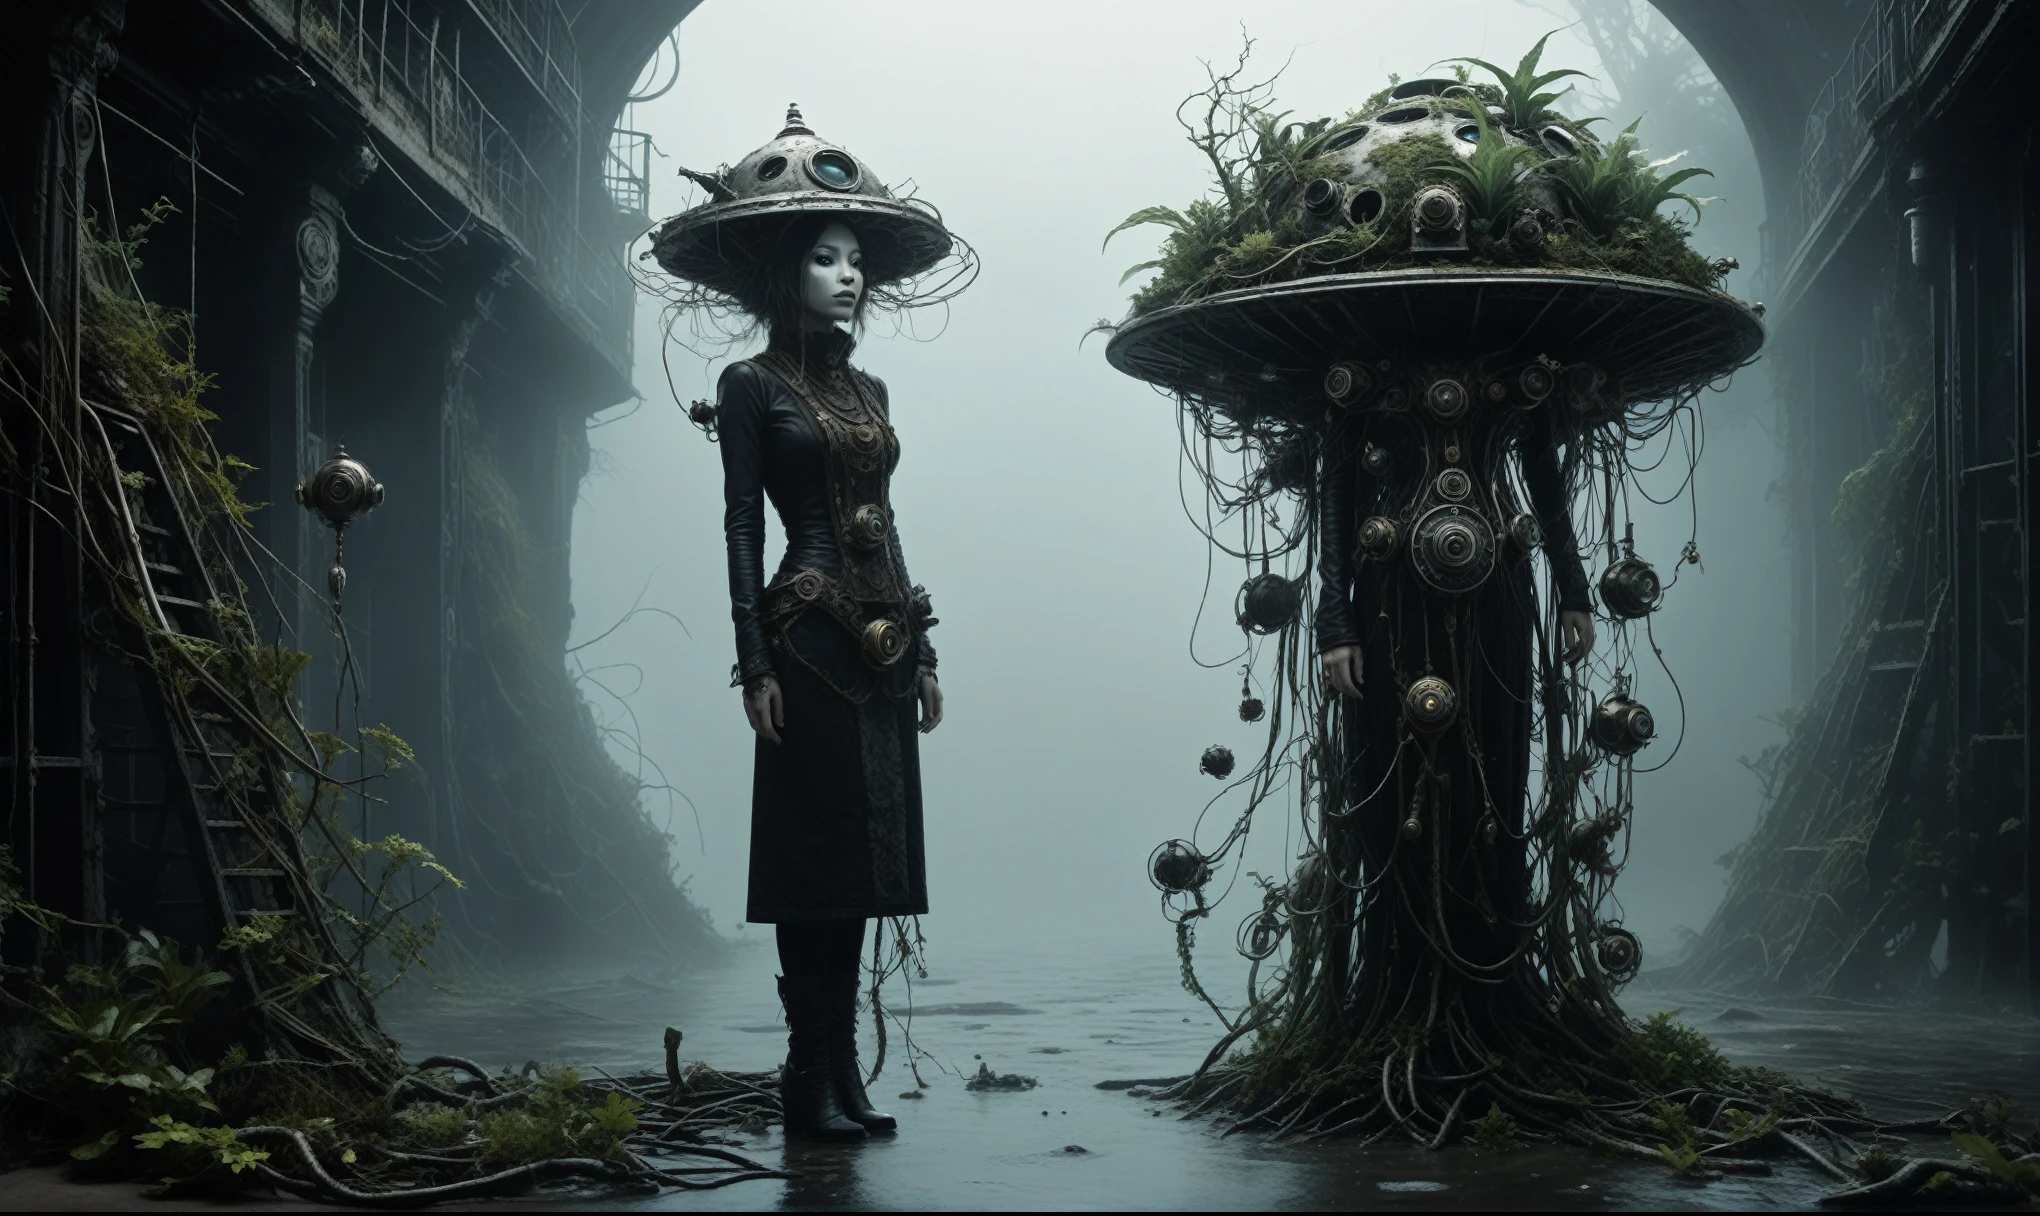 steampunk  fantasy, young plant witch made of dead plants huntering, black and white color mechanical clockwork Spaceship under sea, ominous landscapes,a small floating mkitdecy-planet in concrete and rusted metal struts that looks like a see-mine, low-key, glowing, cinematic,ruined,ruined theme,lots of dust,amazon,full body length,maybe pretty face,full body length, eerie atmosphere, ethereal presence,  swirling mists, supernatural entities, demonic essence, shadowy forms,   dark and twisted branches, macabre elements, otherworldly beauty, ethereal glow, eerie and ominous lighting，Ethereal otherworldly charm，Complicated details，Exquisite features,Surreal atmosphere,captivating creation,After the war，Maritime bazar of science and technology,like Stone Forest in Yunnan Province of Zambia,Simon Stalenhag,Nicola Samori,Wangechi Mutu,intricate details,realism,realistic,extremely detailed,masterpiece,intricate details,eyes extremely detailed, high detailed eyes,32k resolution, Nikon Z9